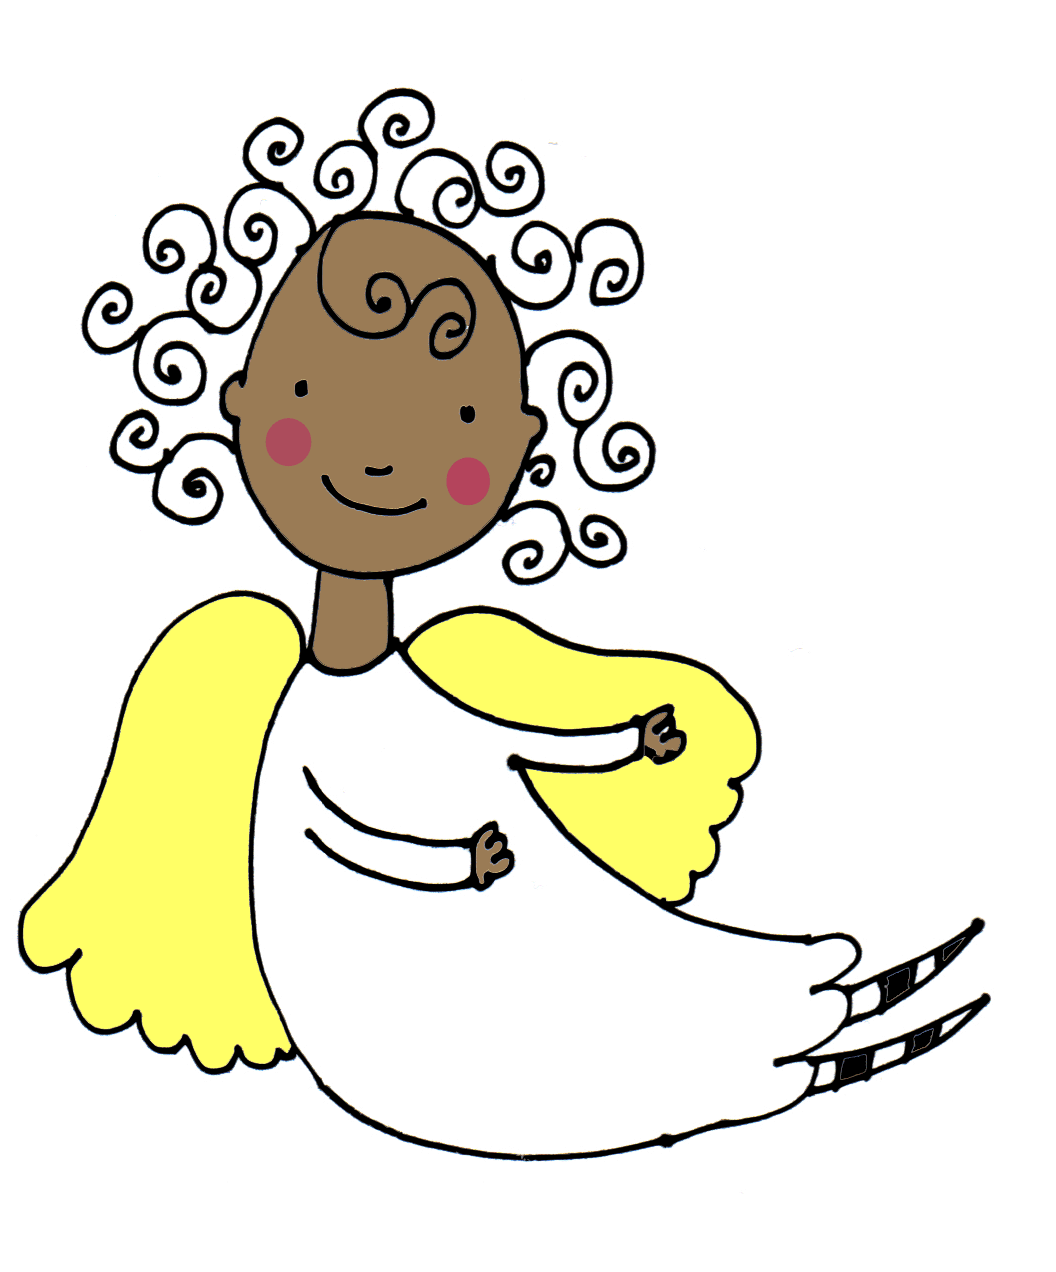 Angel Free Clipart - ClipArt Best